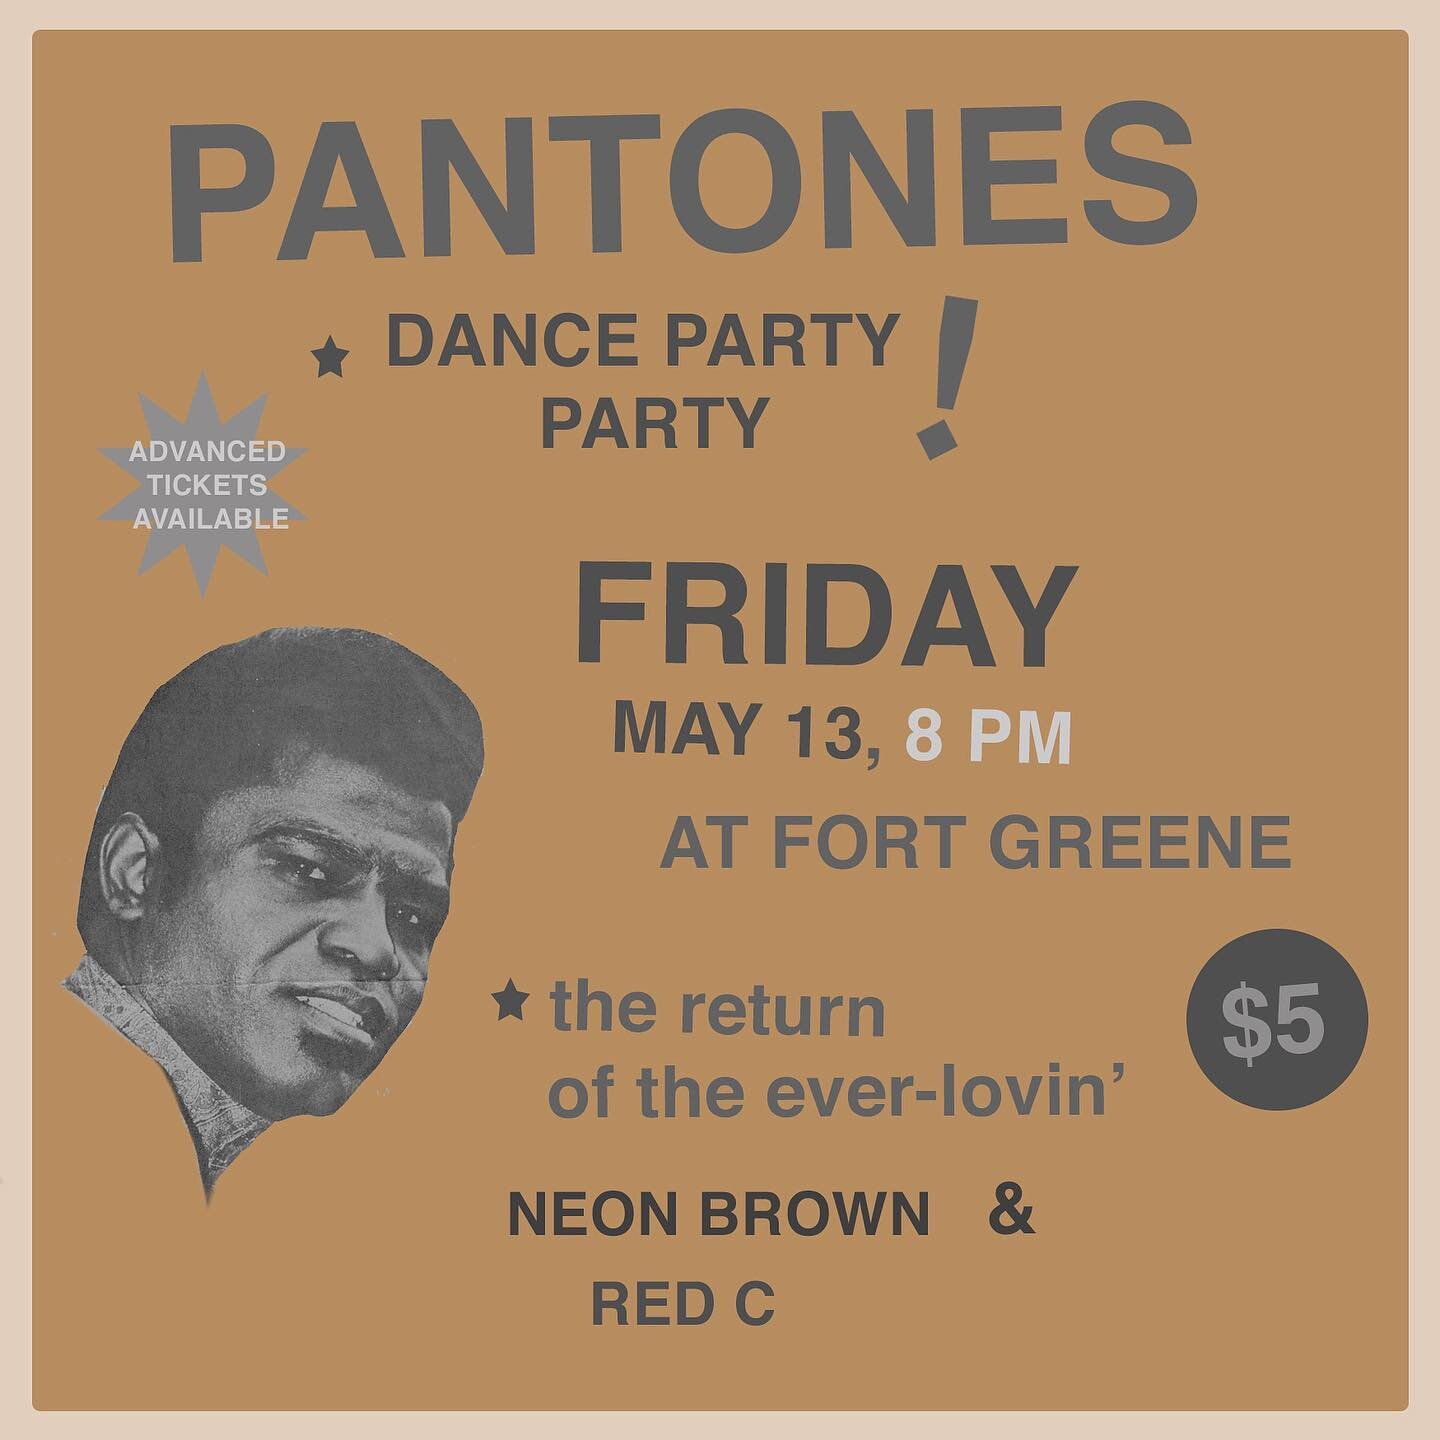 Friday, May 13th from 8 pm - 12 am @pantonesdenver is back! We are happy to announce that we will be getting in the groove with our good friends at @ftgreenebar. Come and get funky with us! @lilredham and @givemeacallbackitsyourdad will be laying dow